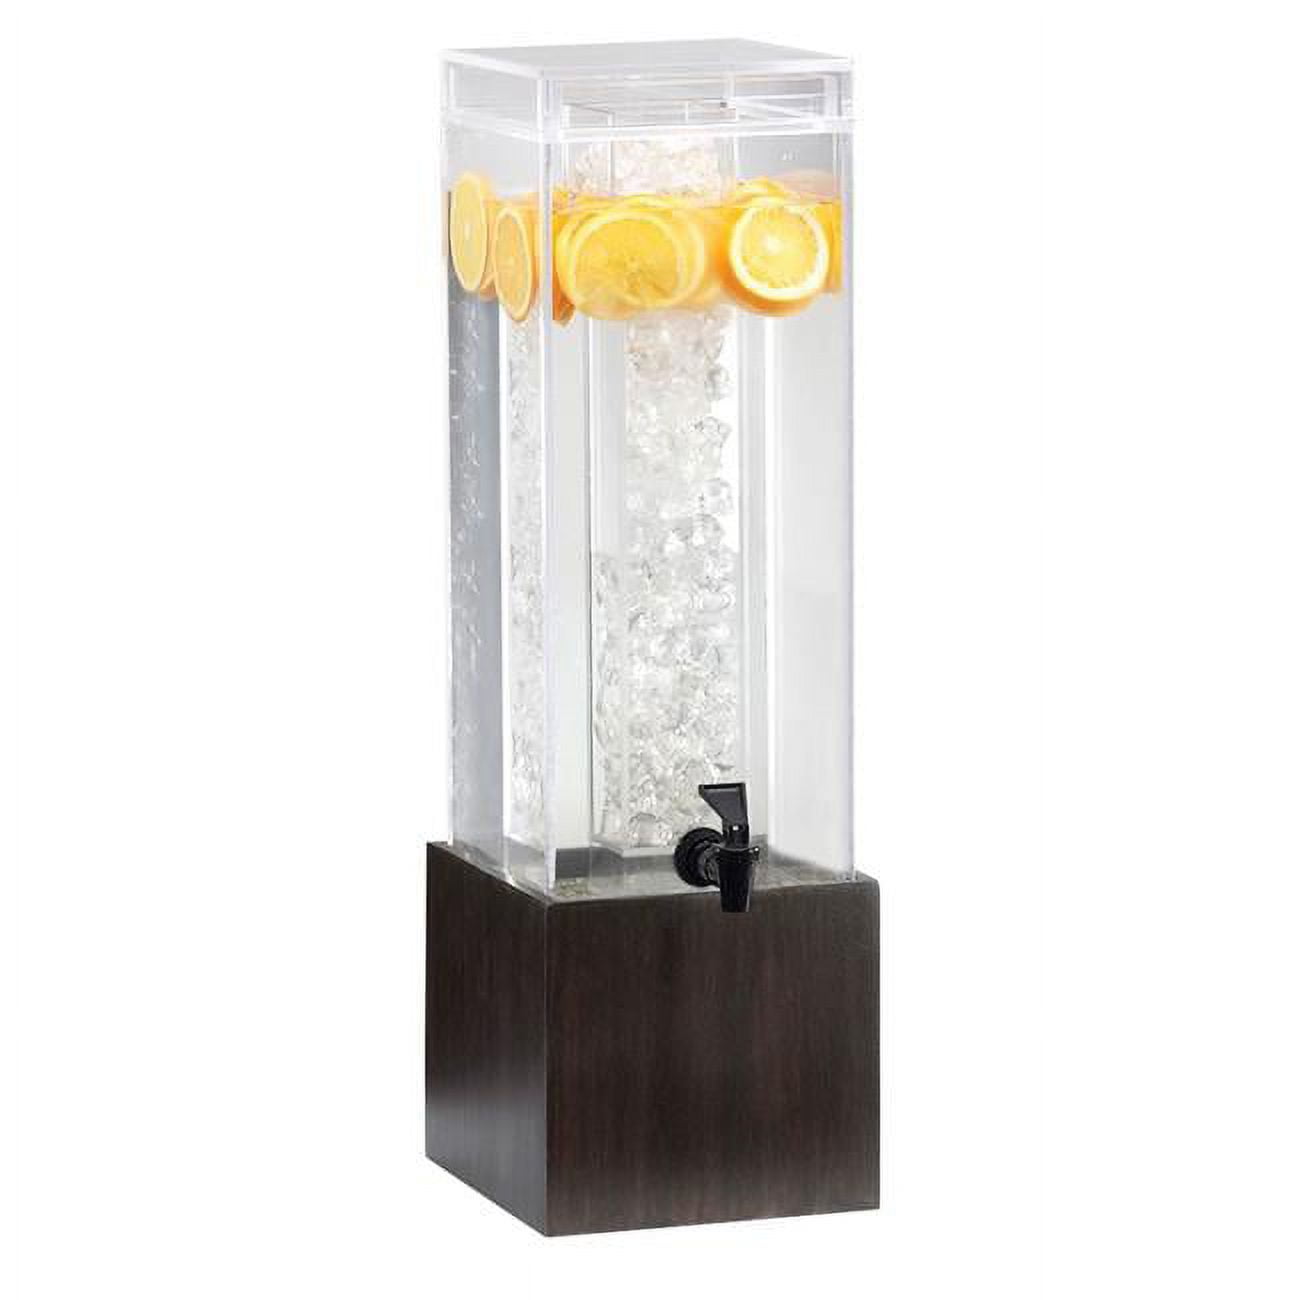 Picture of Cal Mil 1527-3-96 3 gal Midnight Bamboo Beverage Dispenser - 8.125 x 9.75 x 25.75 in.